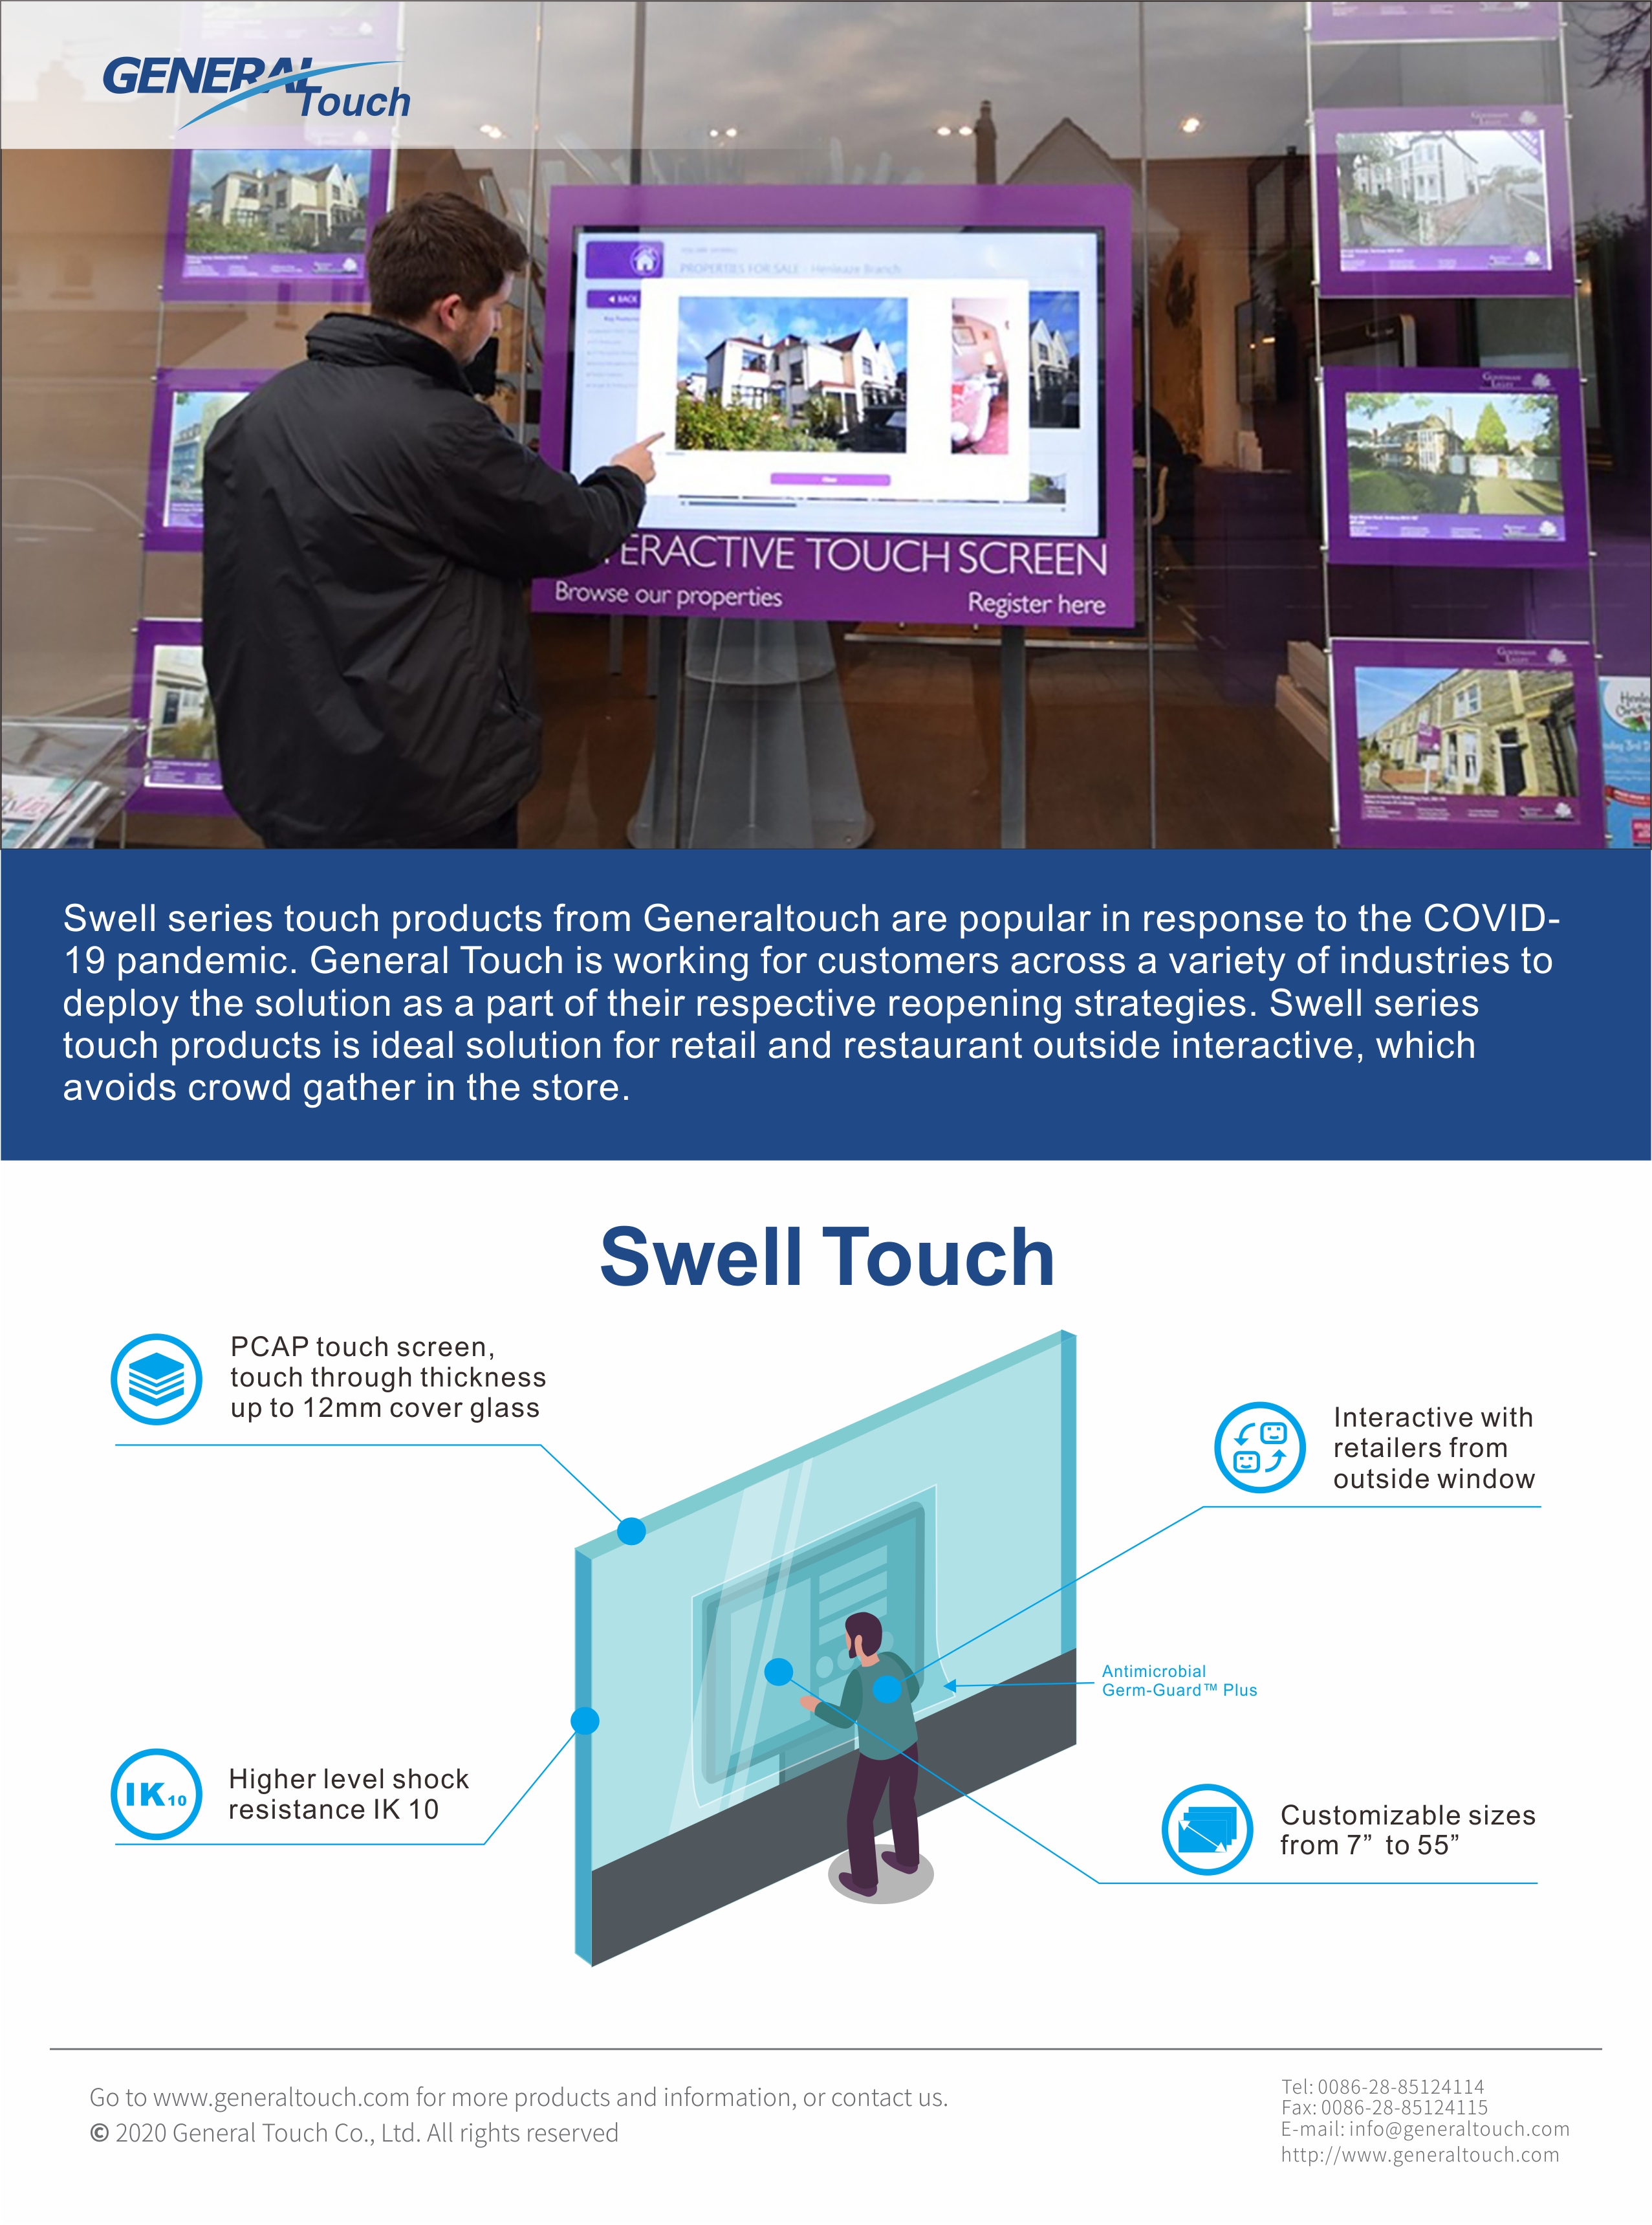 Swell series touch products from Generaltouch are popular in response to the COVID-19 pandemic